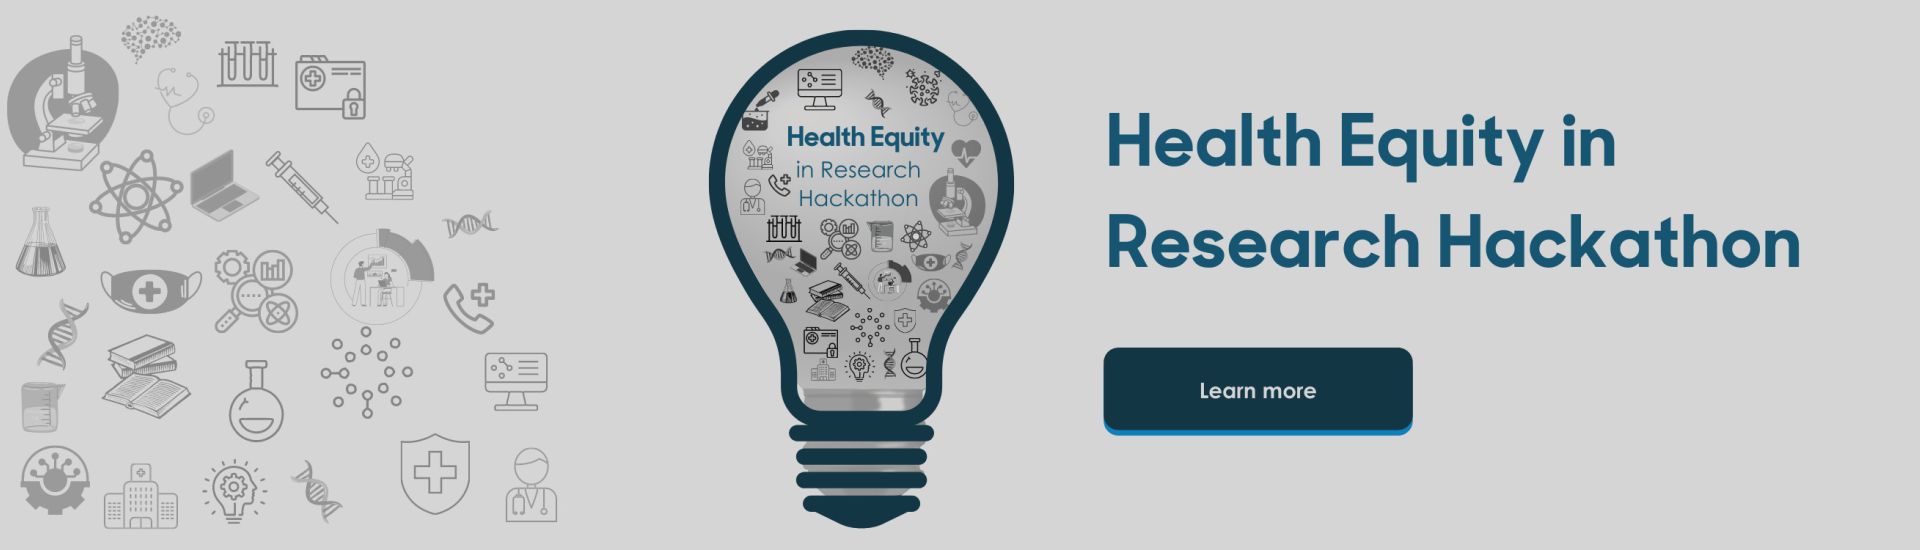 Health Equity in Research Hackathon - Learn More